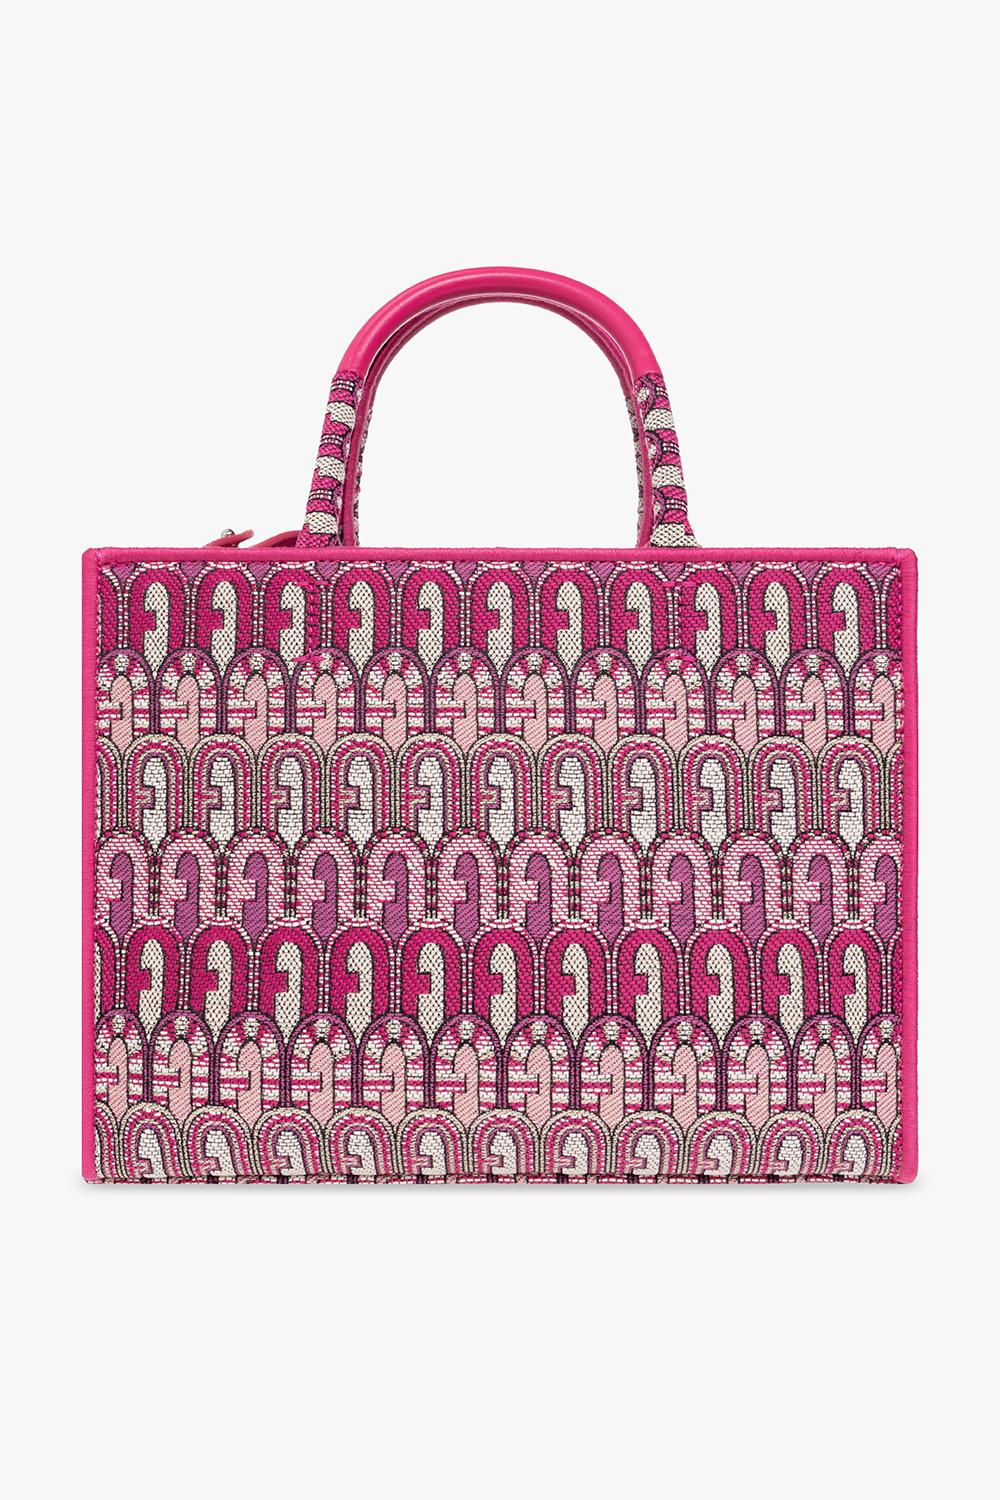 Furla Opportunity Logo Small Printed Canvas Tote Bag